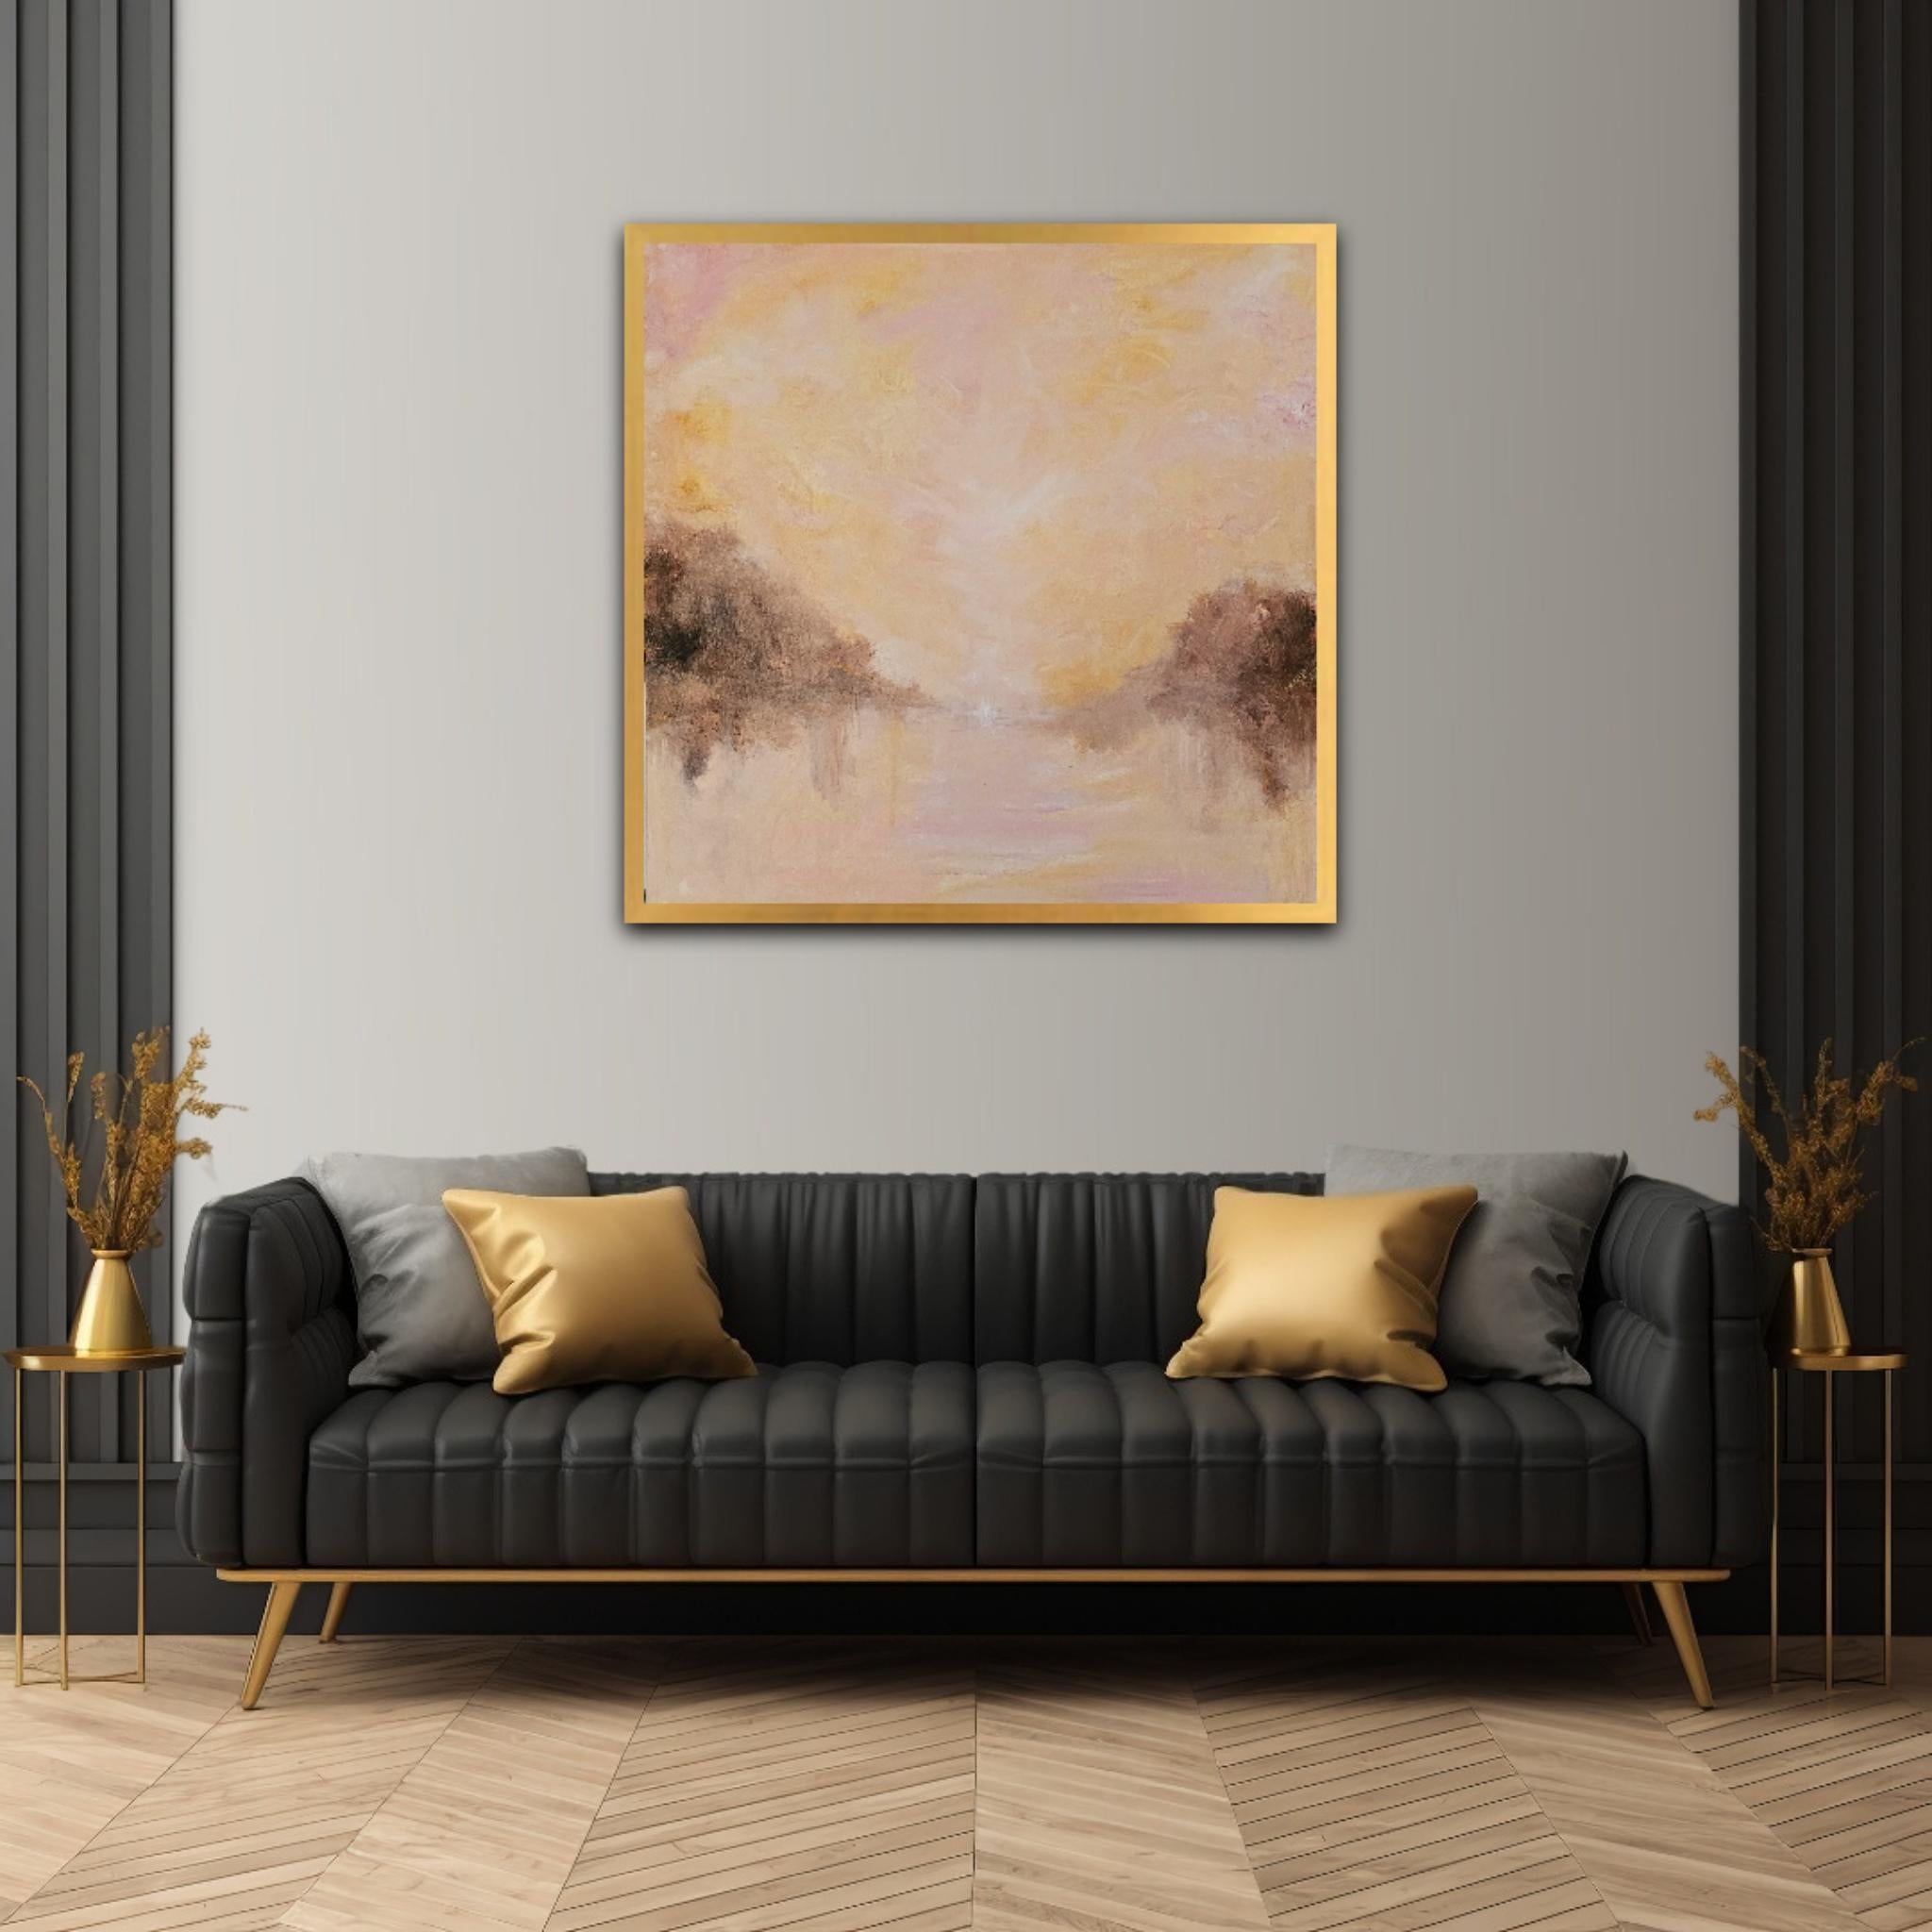 Grand rising - Large peach fuzz color abstract landscape painting For Sale 12